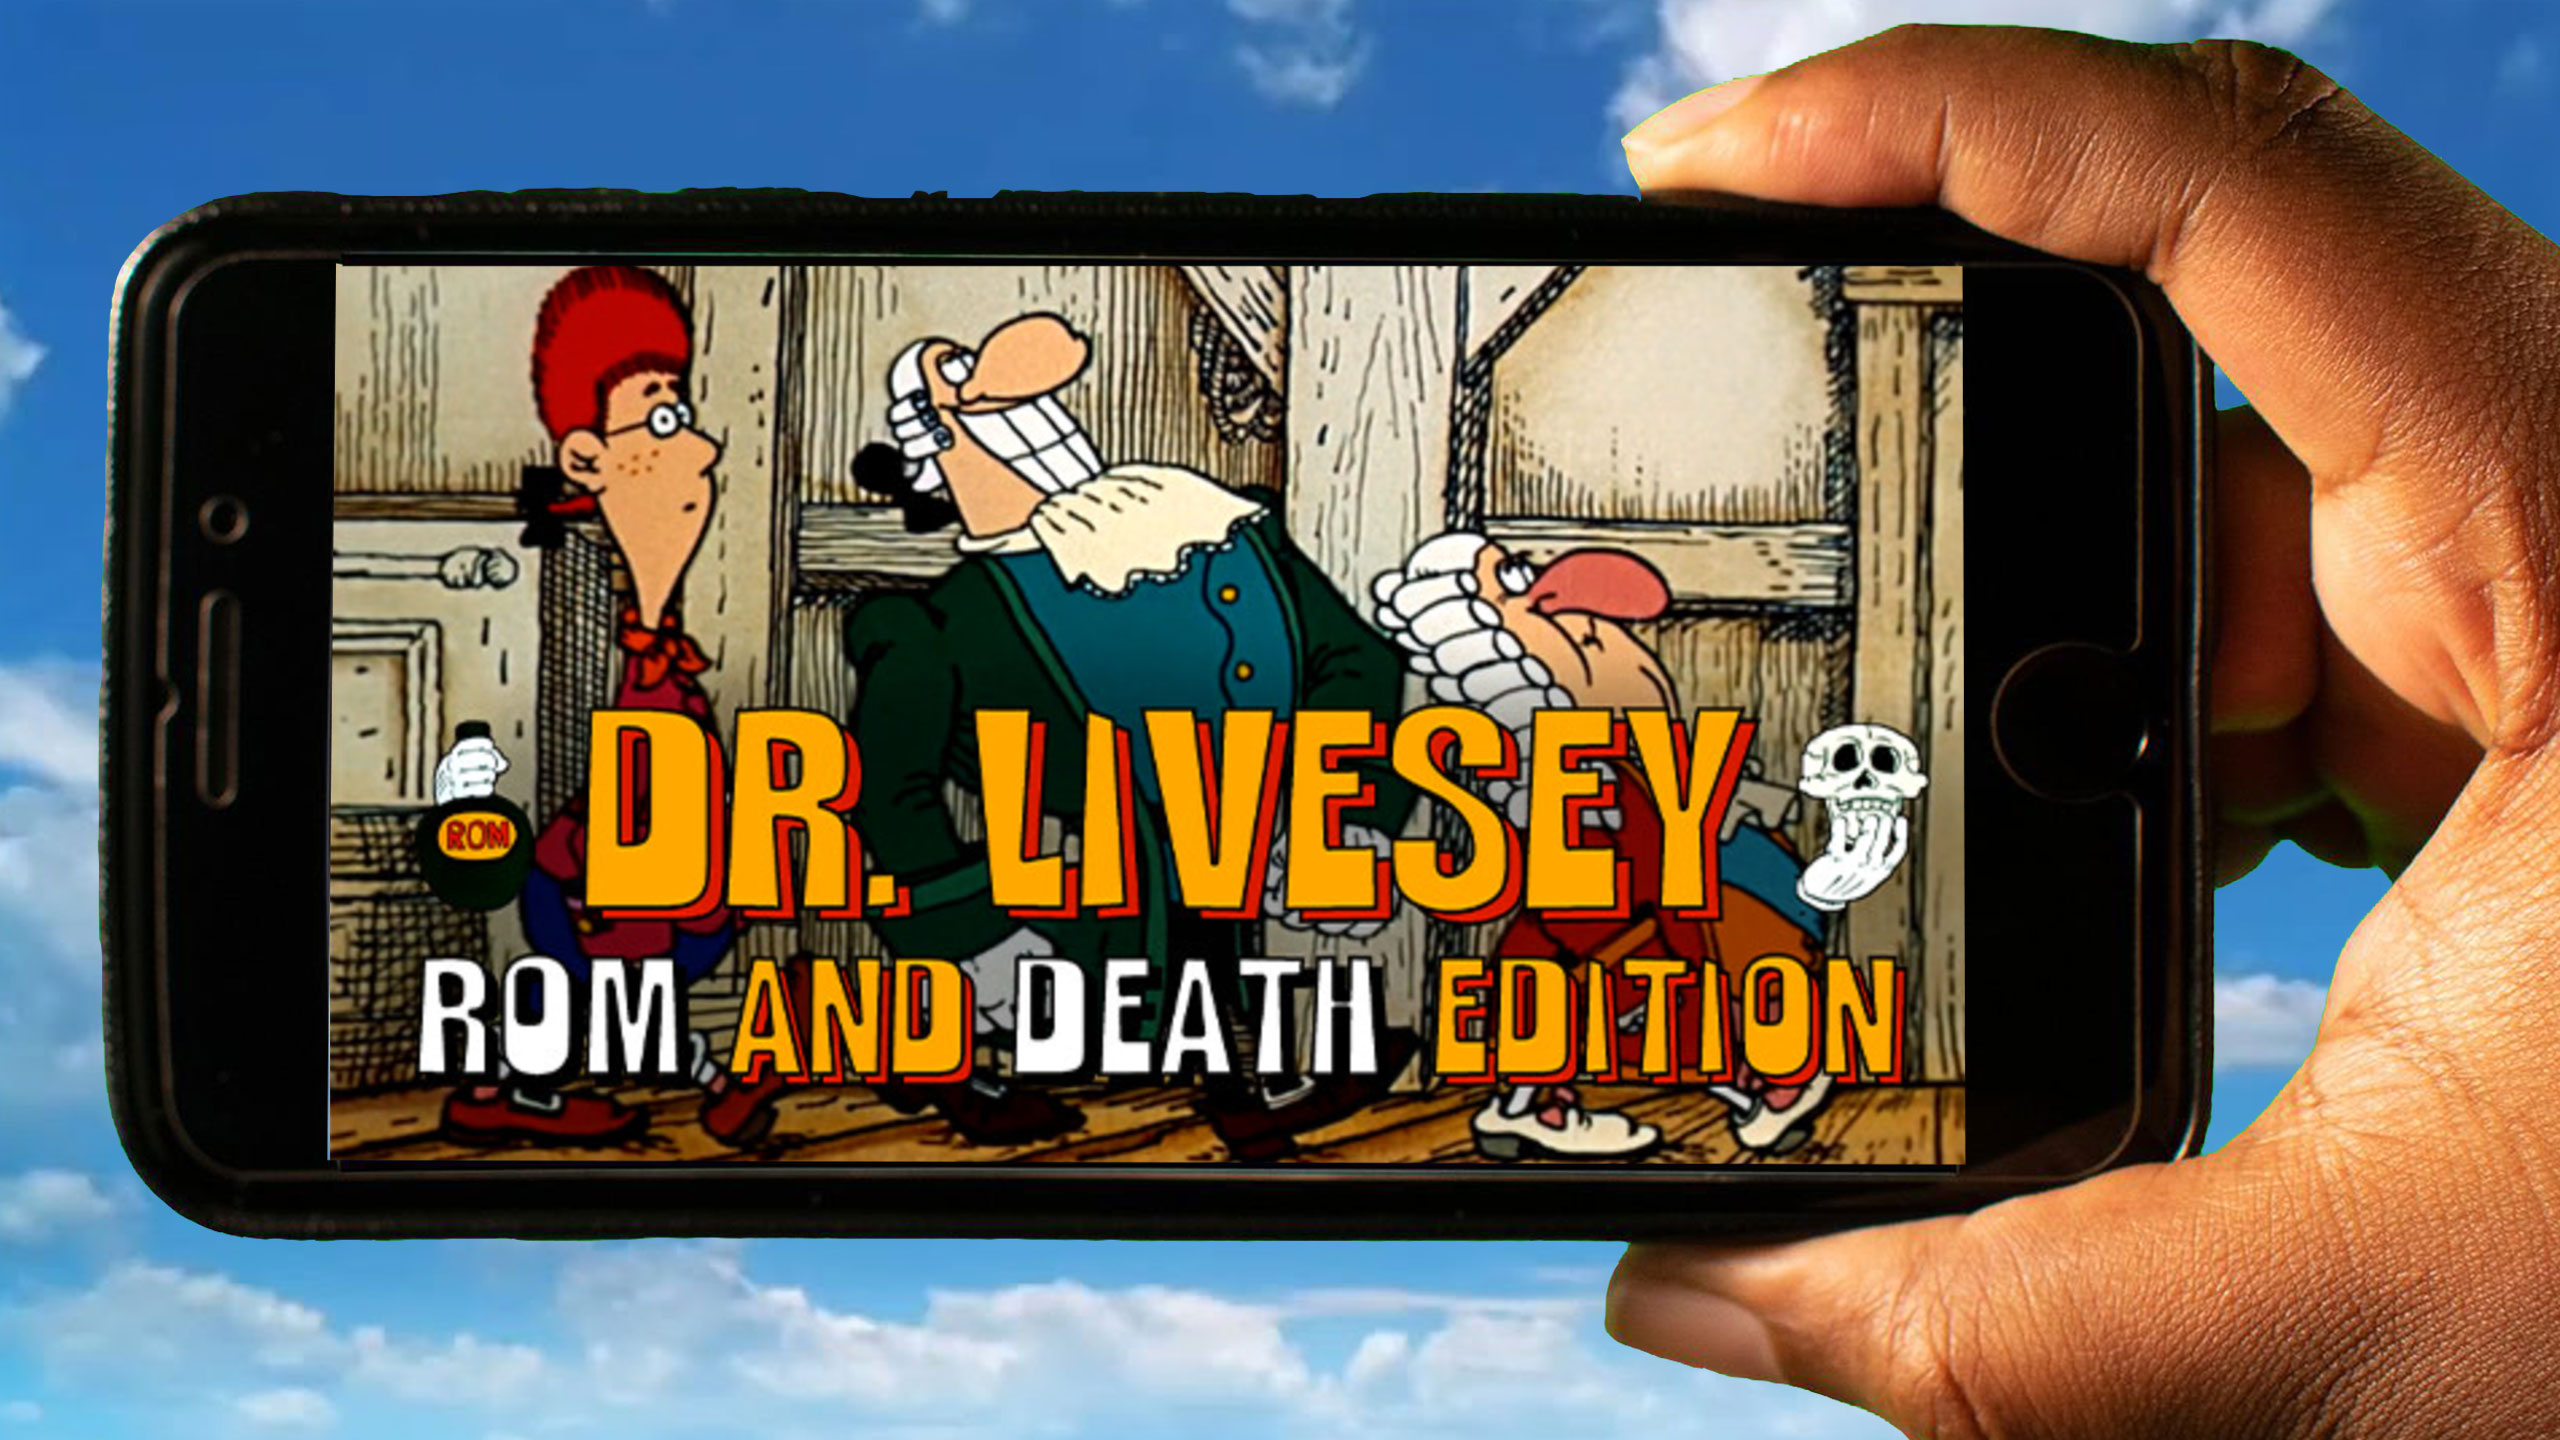 How long is Dr. Livesey Rom and Death Edition?